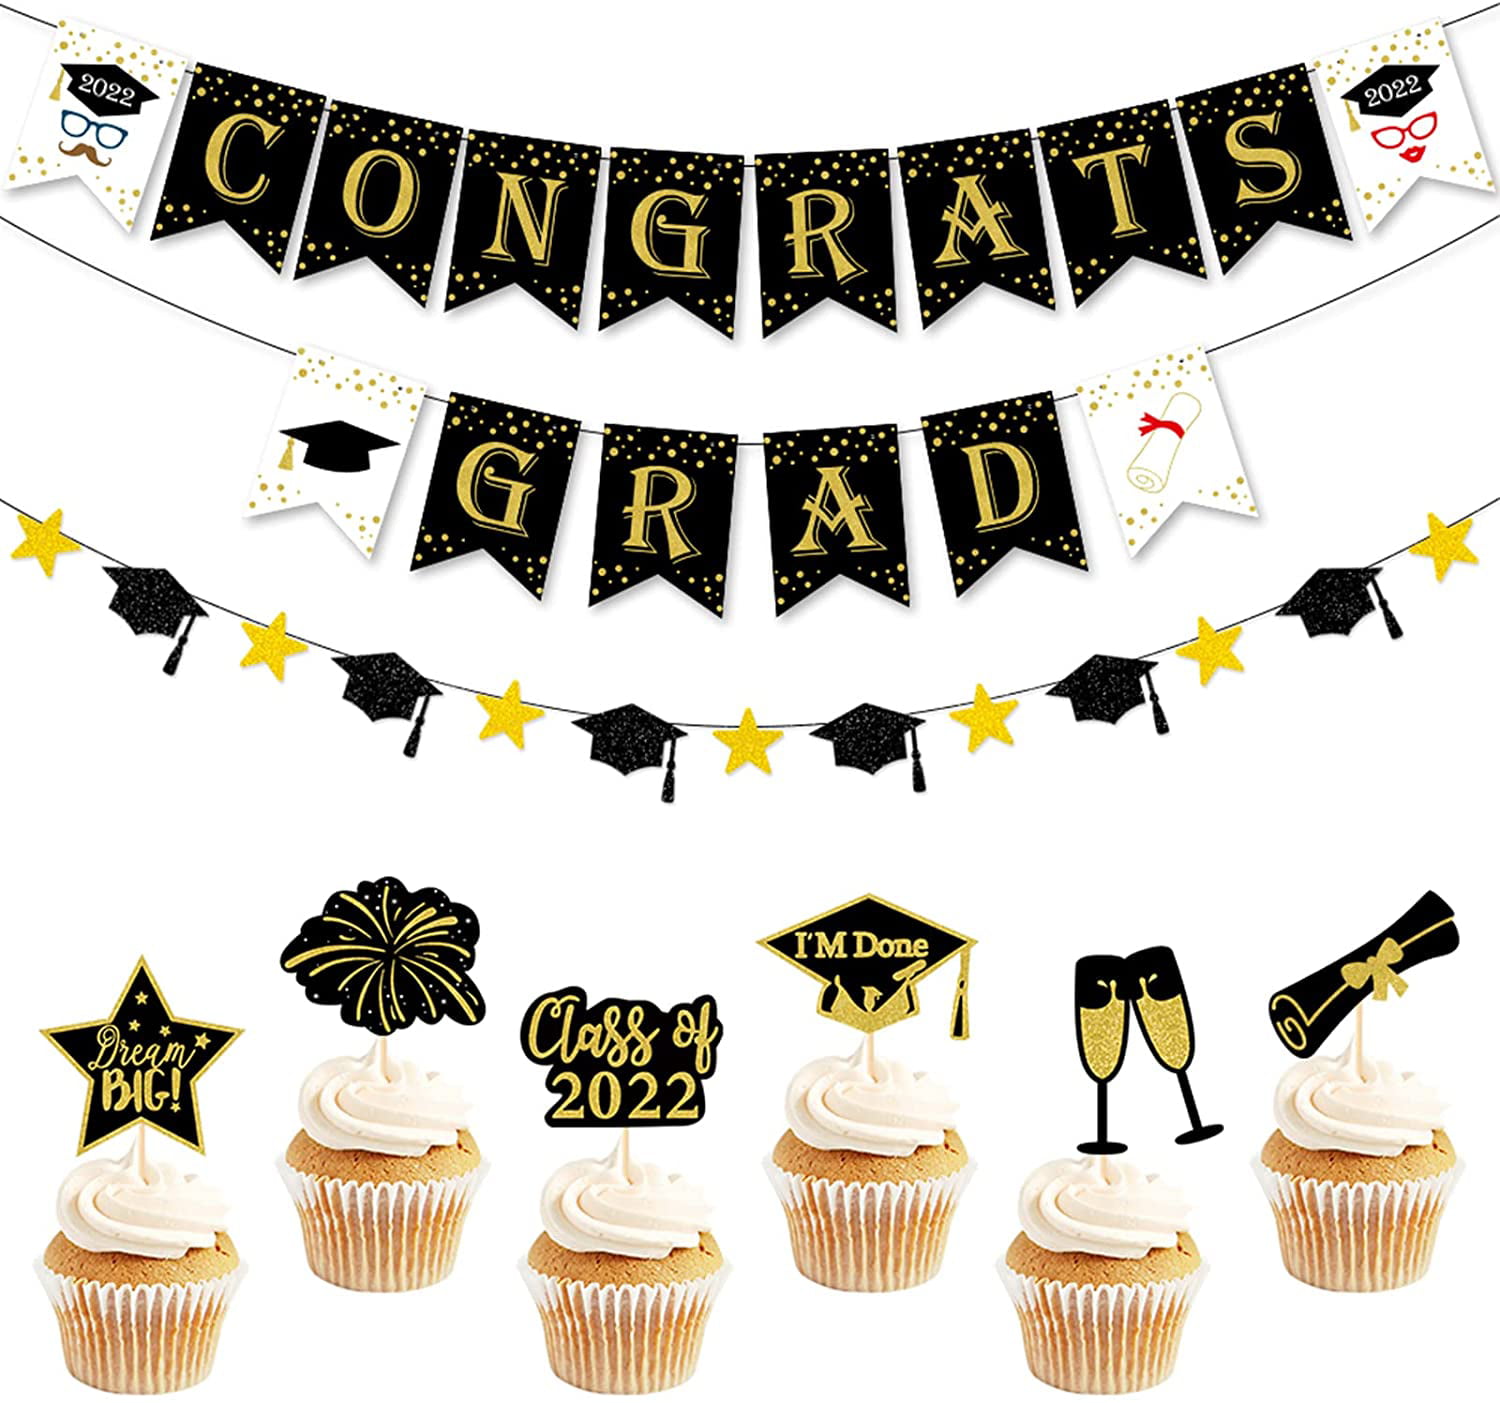 2019 Graduation Party Decorations,Graduation Decorations Gold Glittery Class Of 2019 Banner and Gold Glittery Congrats Banner 